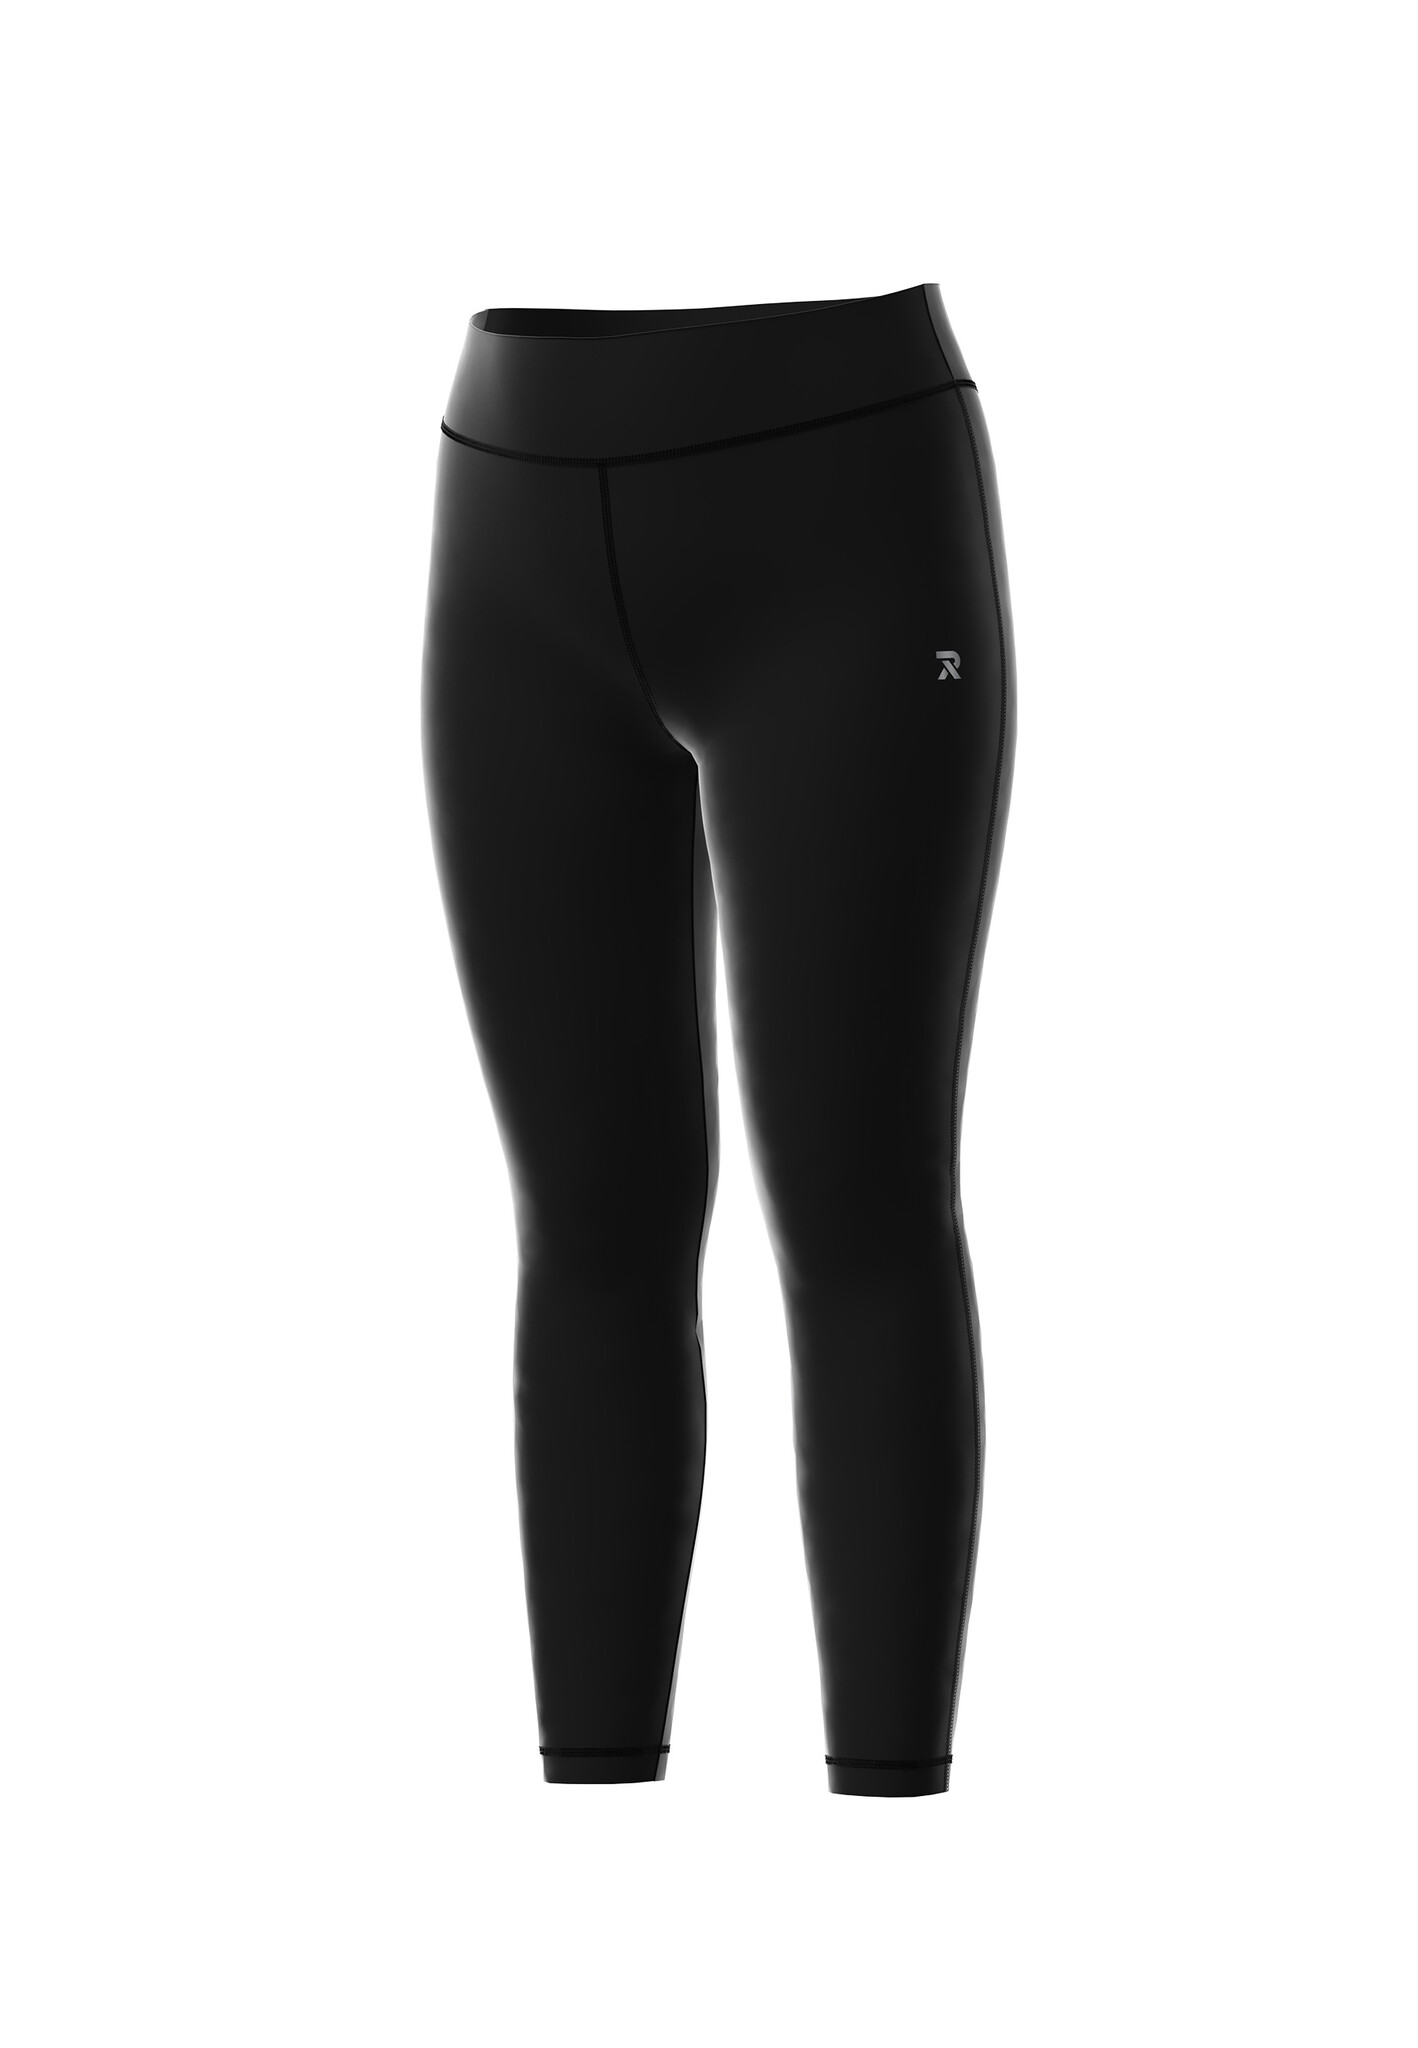 Redmax Women's sports legging Dry-Cool - sustainable 